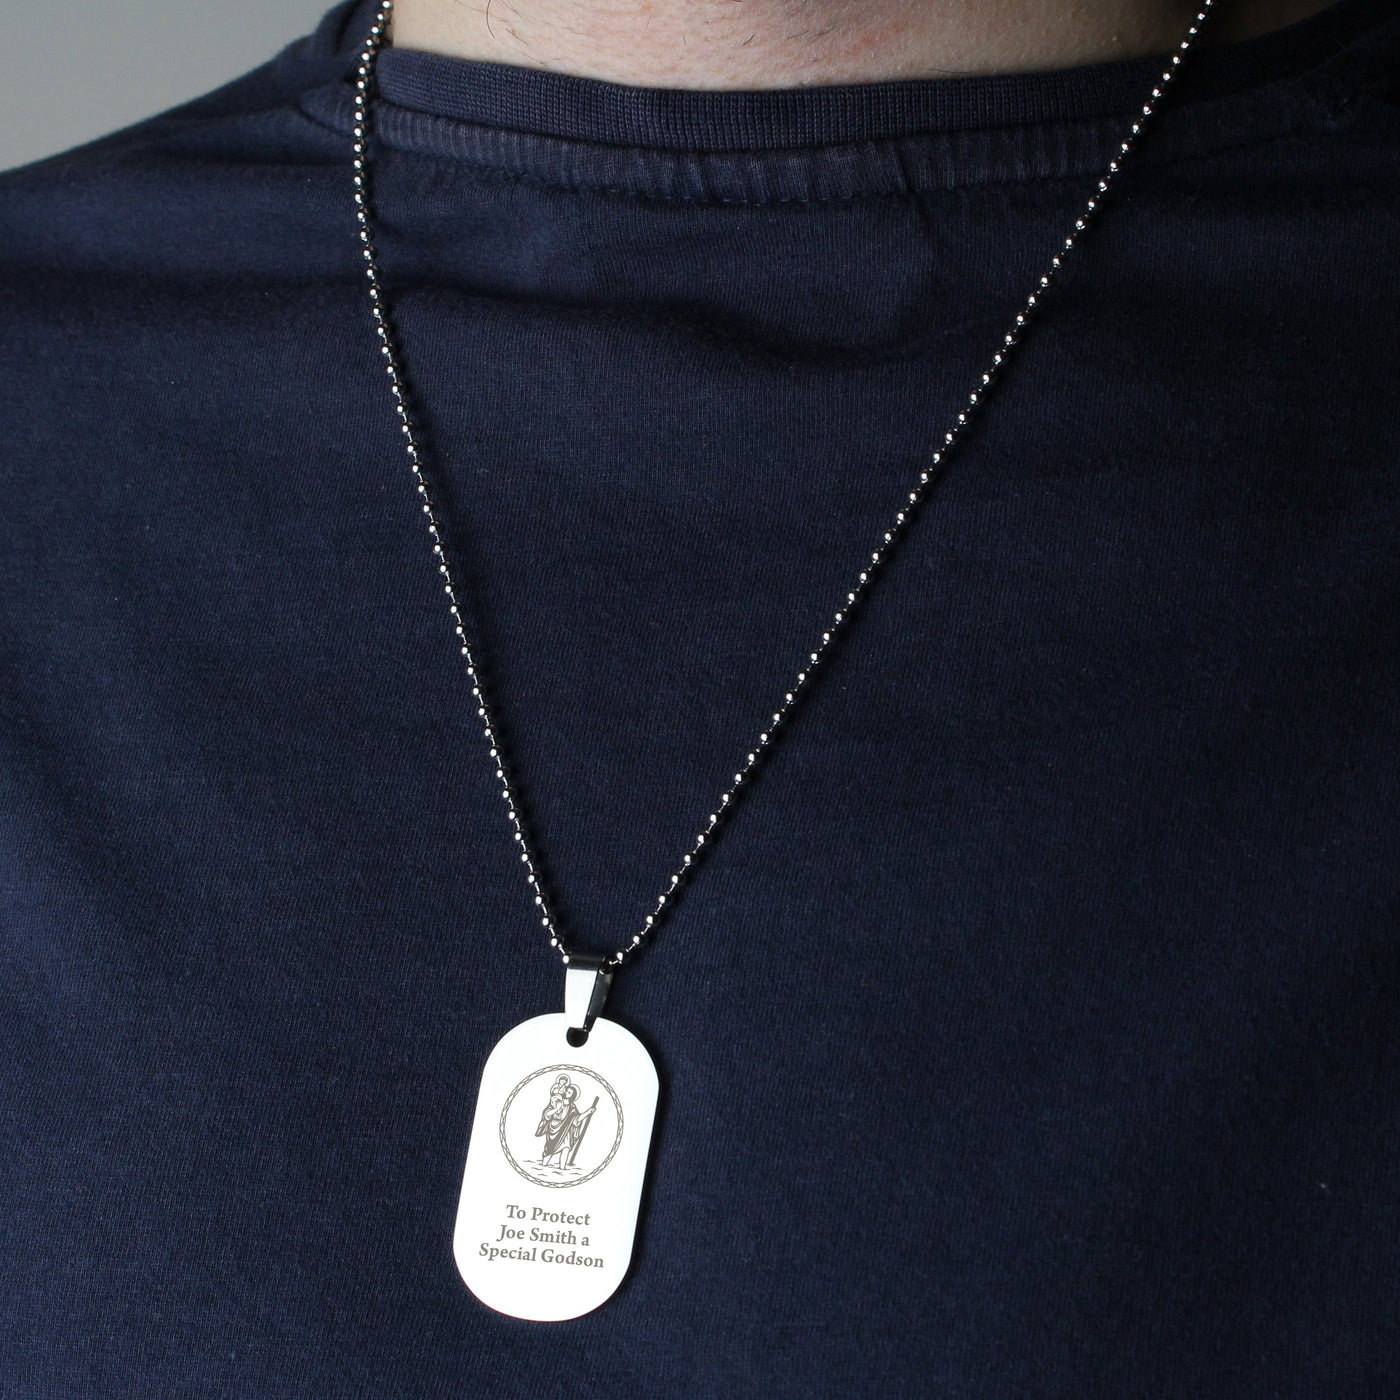 Personalised St Christopher Stainless Steel Dog Tag Necklace - Shop Personalised Gifts